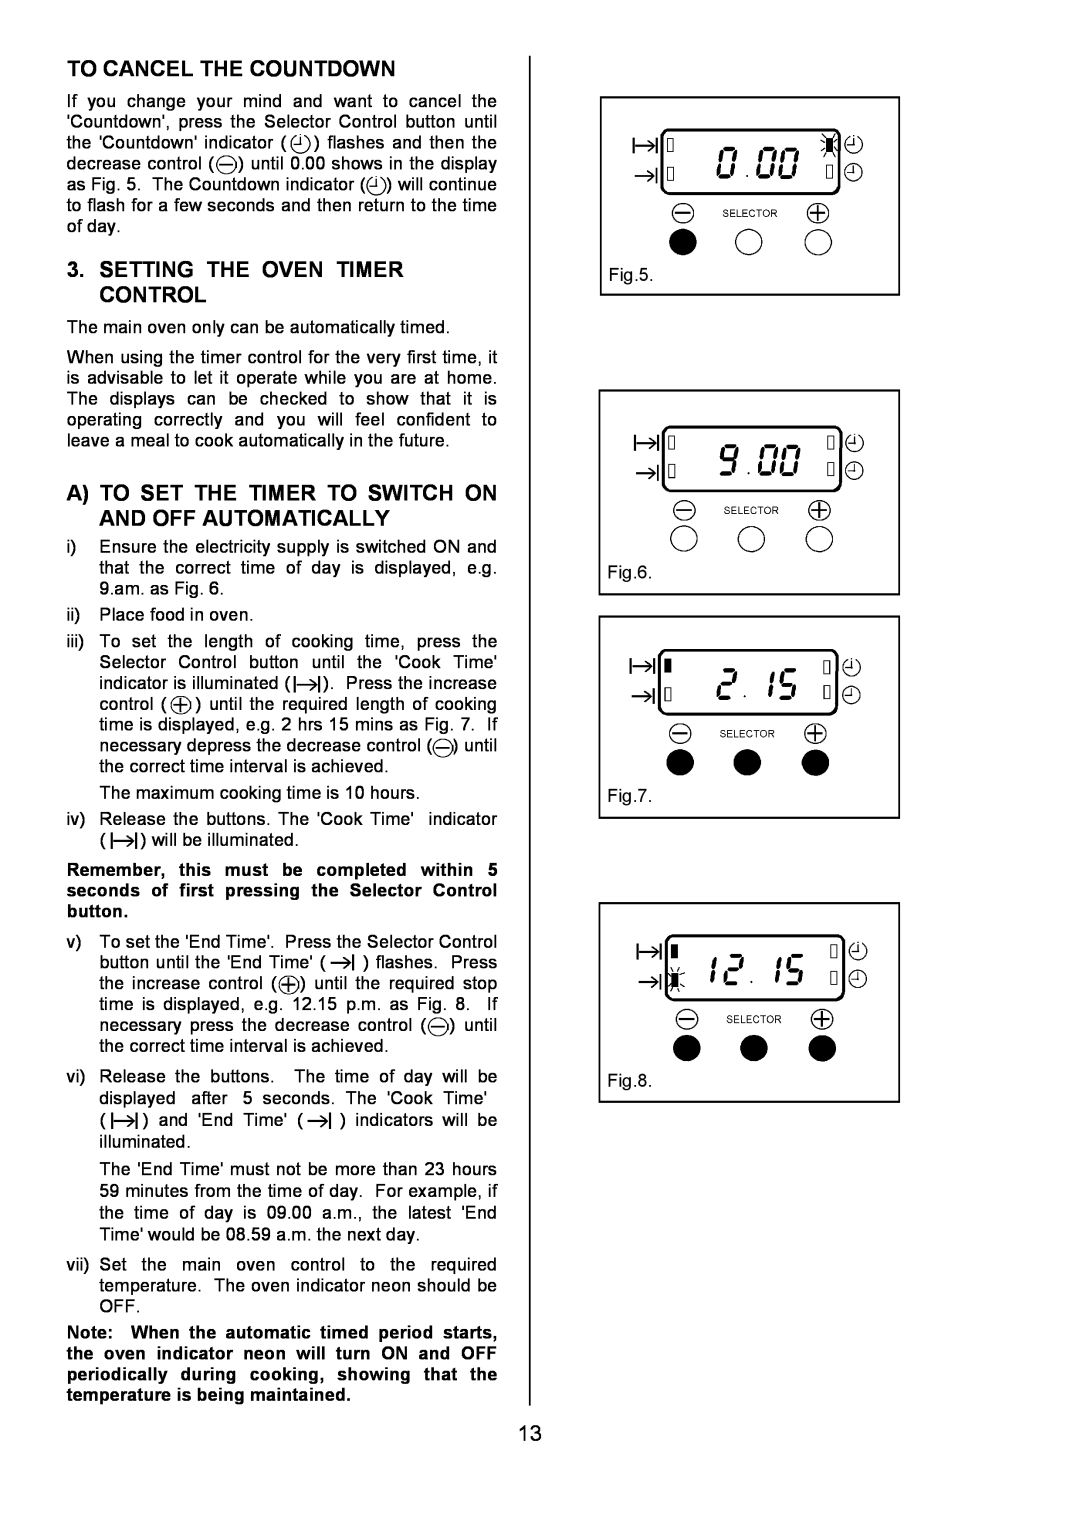 Tricity Bendix SIE556 installation instructions To Cancel The Countdown, Setting The Oven Timer Control 